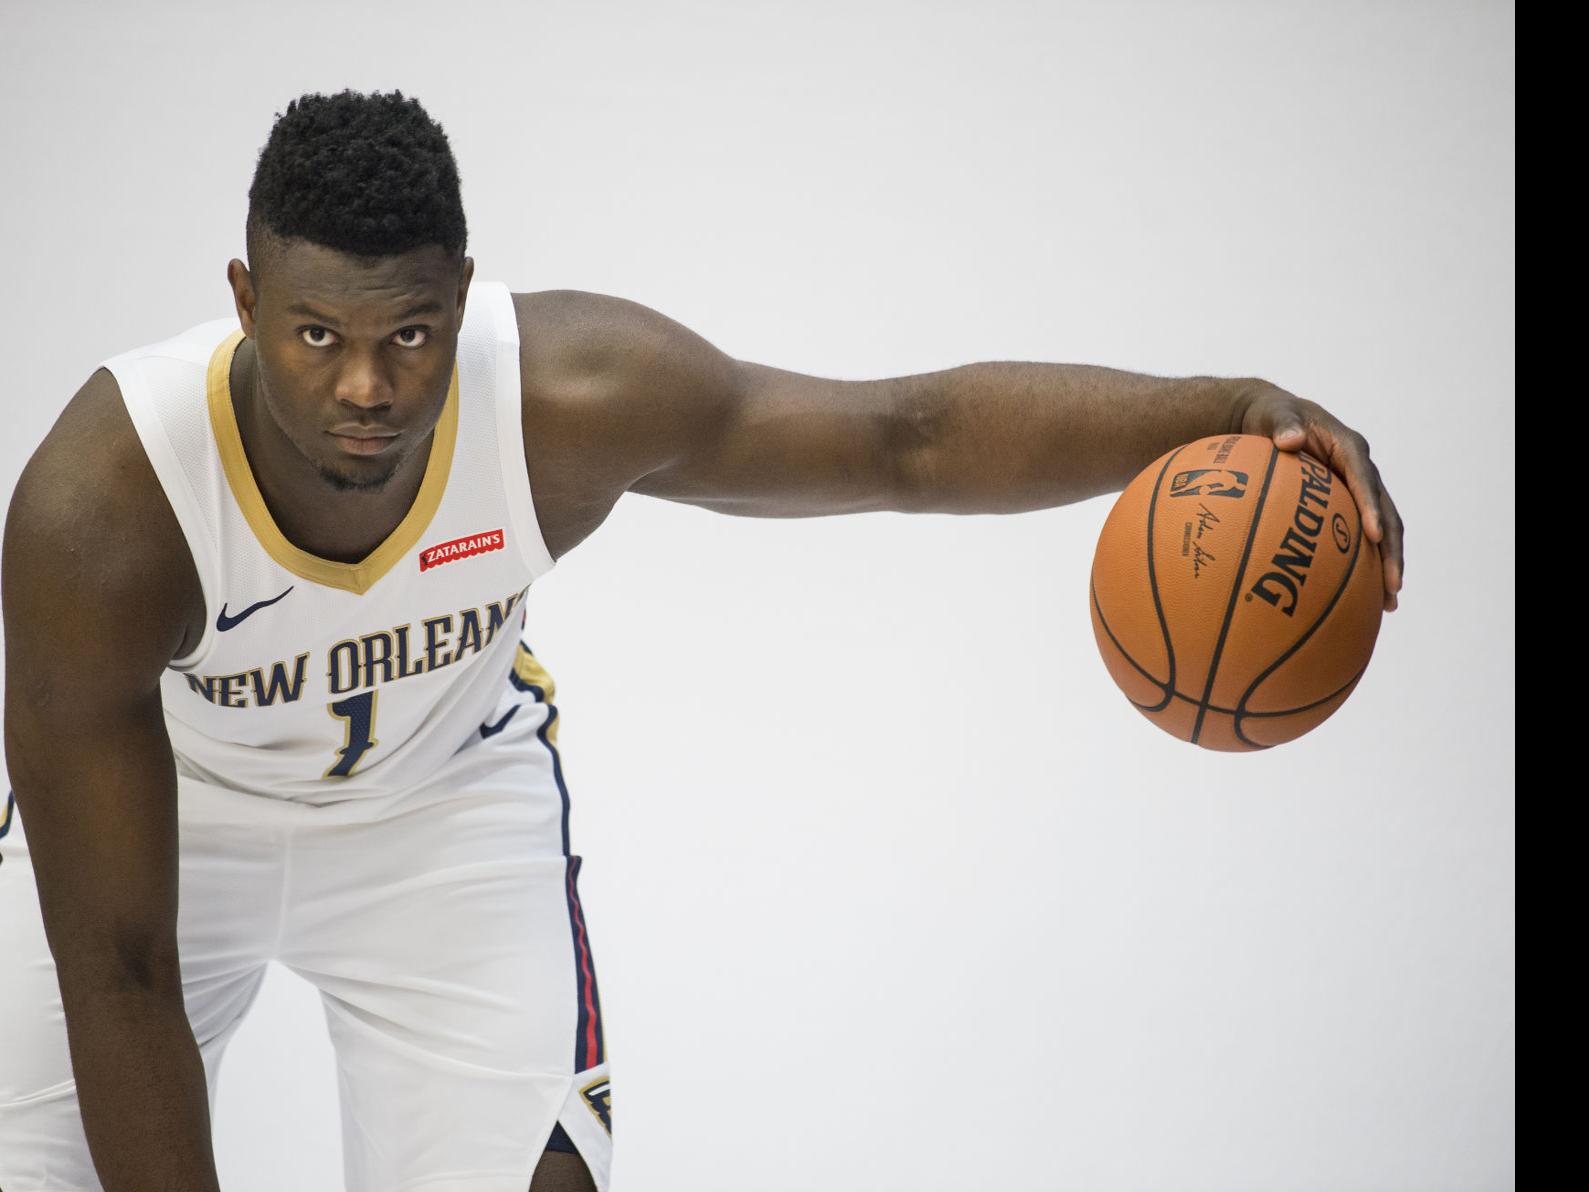 Zion Williamson practicing, could play in Pelicans' opener